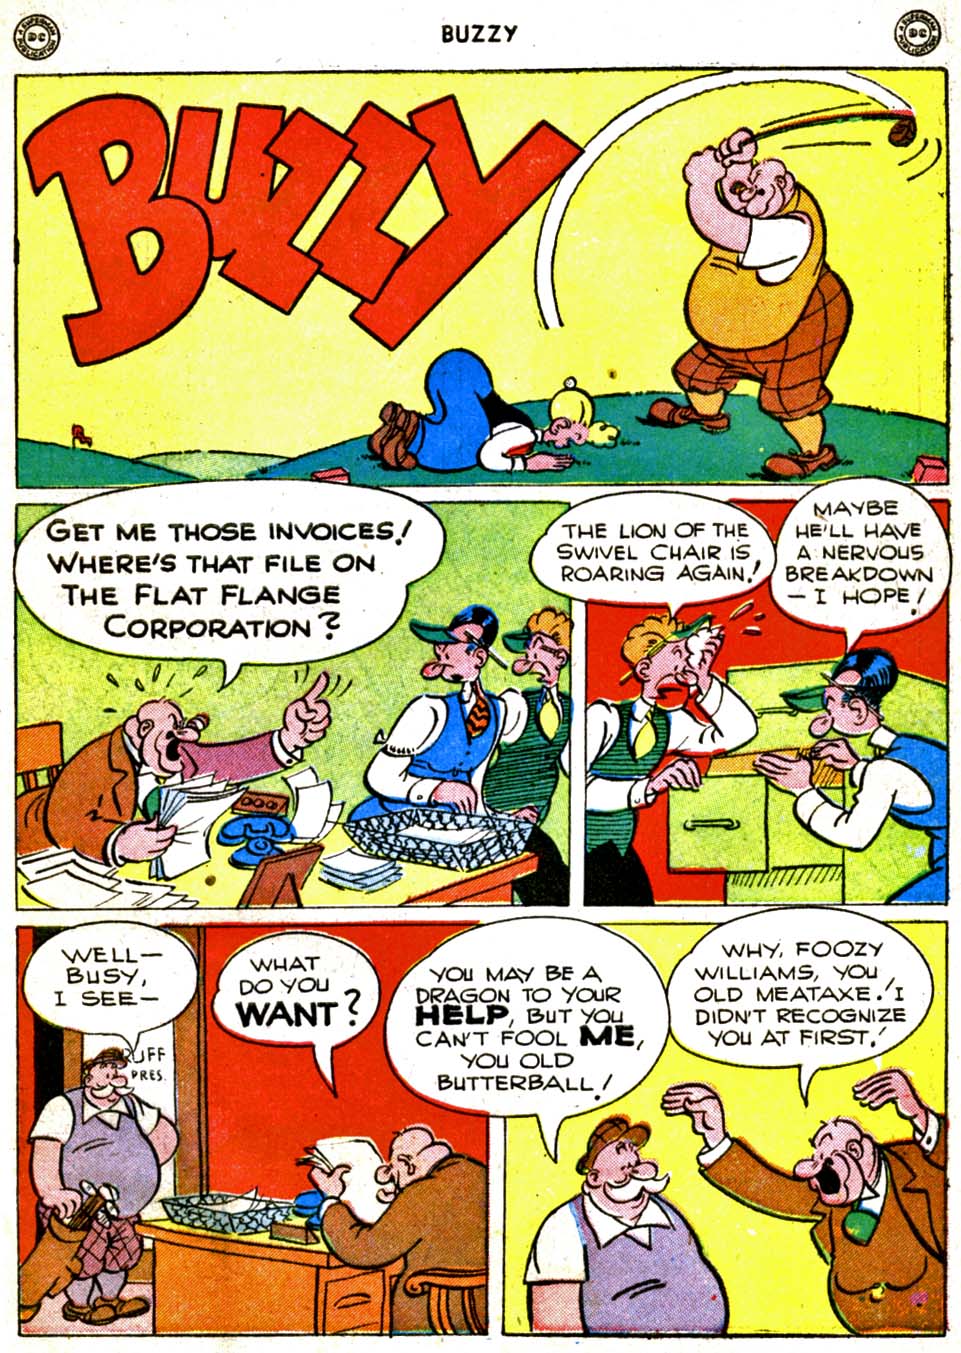 Read online Buzzy comic -  Issue #7 - 3